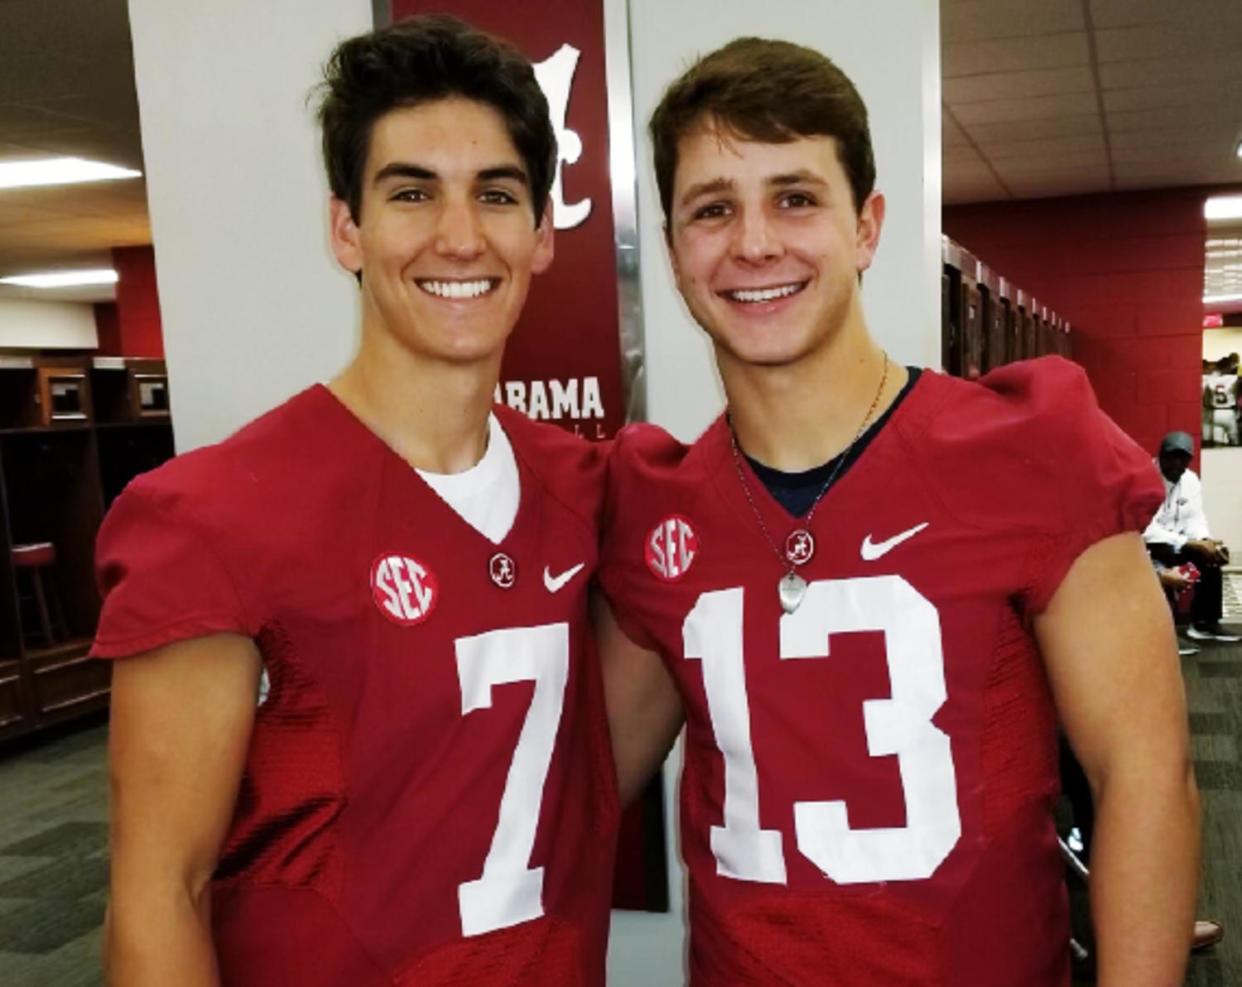 Future Princeton and Iowa State quarterbacks Brevin White and Brock Purdy visit the University of Alabama as high school seniors. (Obtained by NBC News)